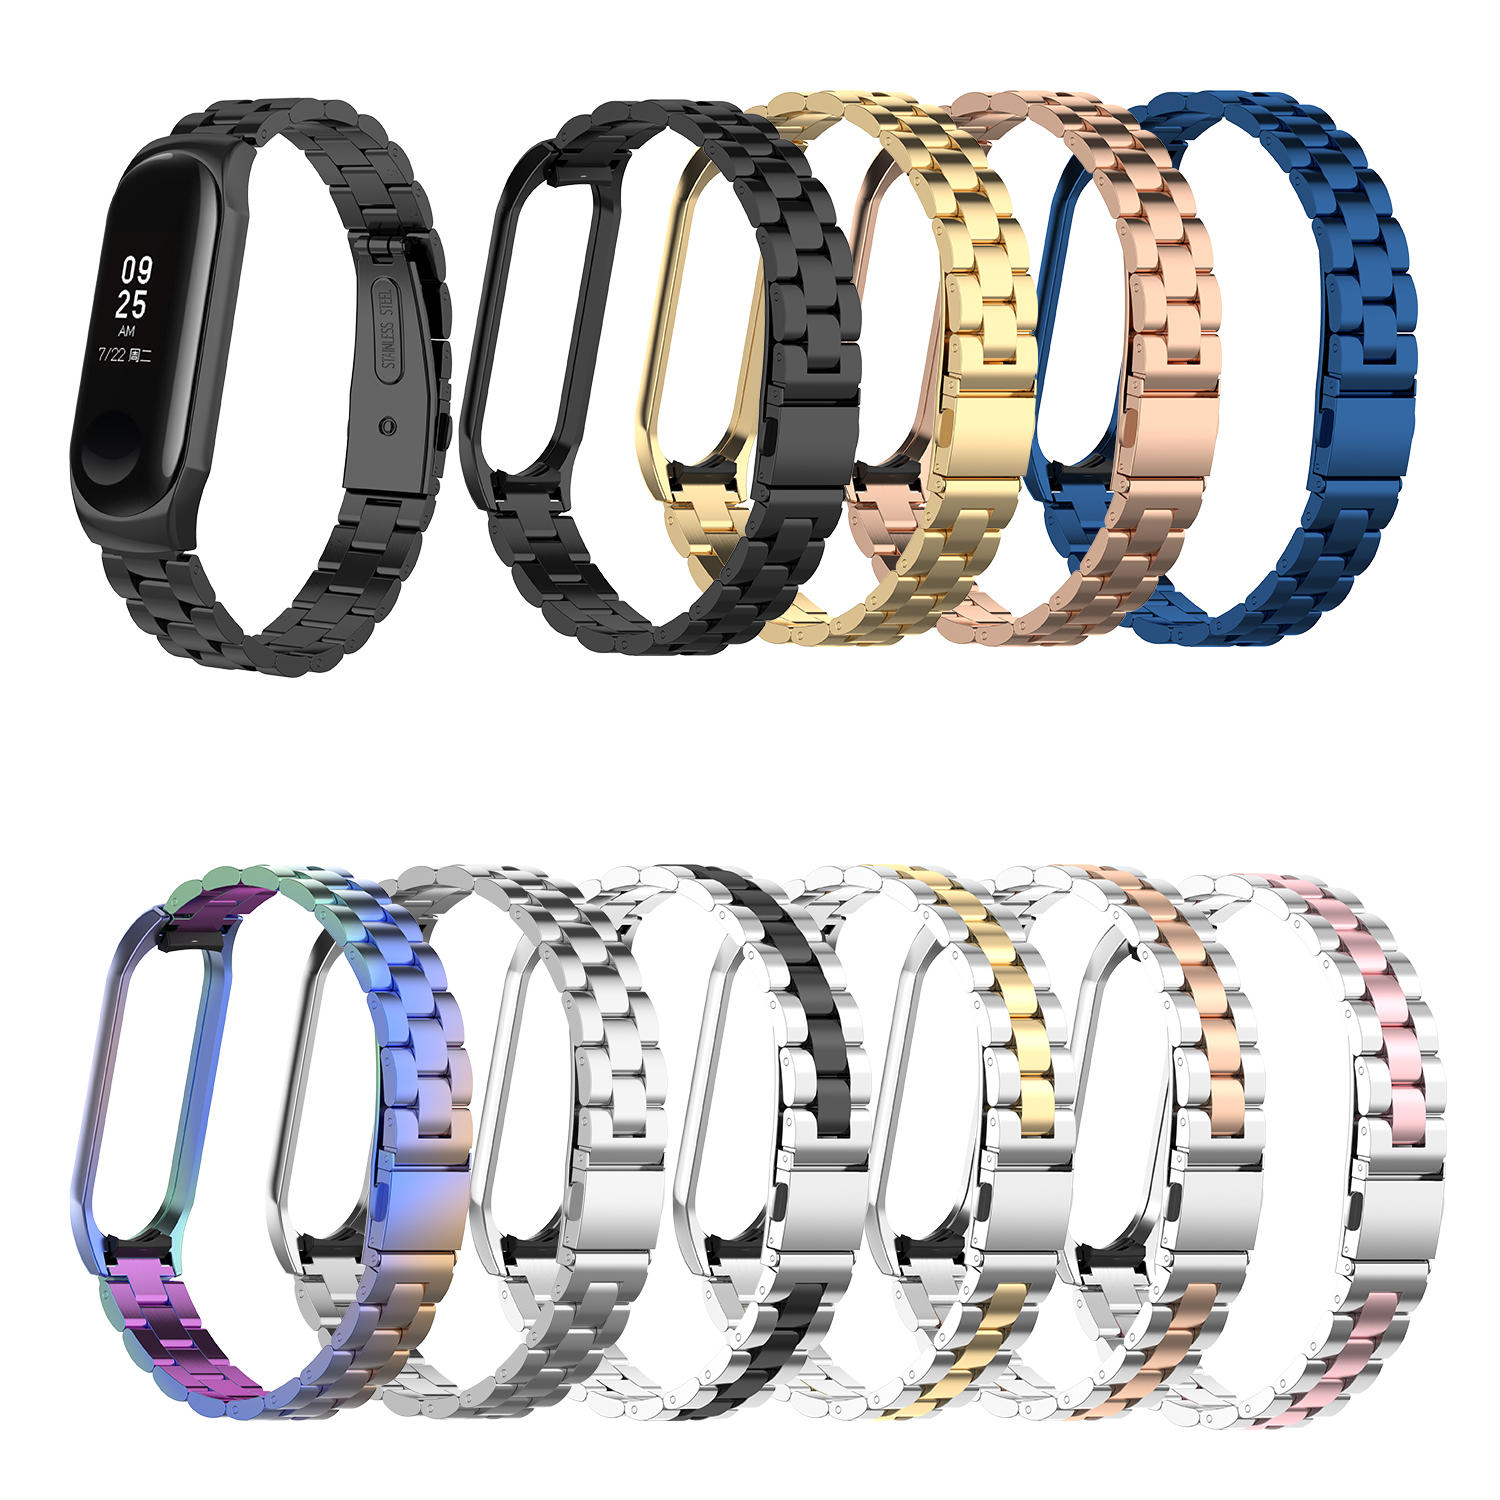 Bakeey colorful stainless steel watch band replacement watch strap for ...